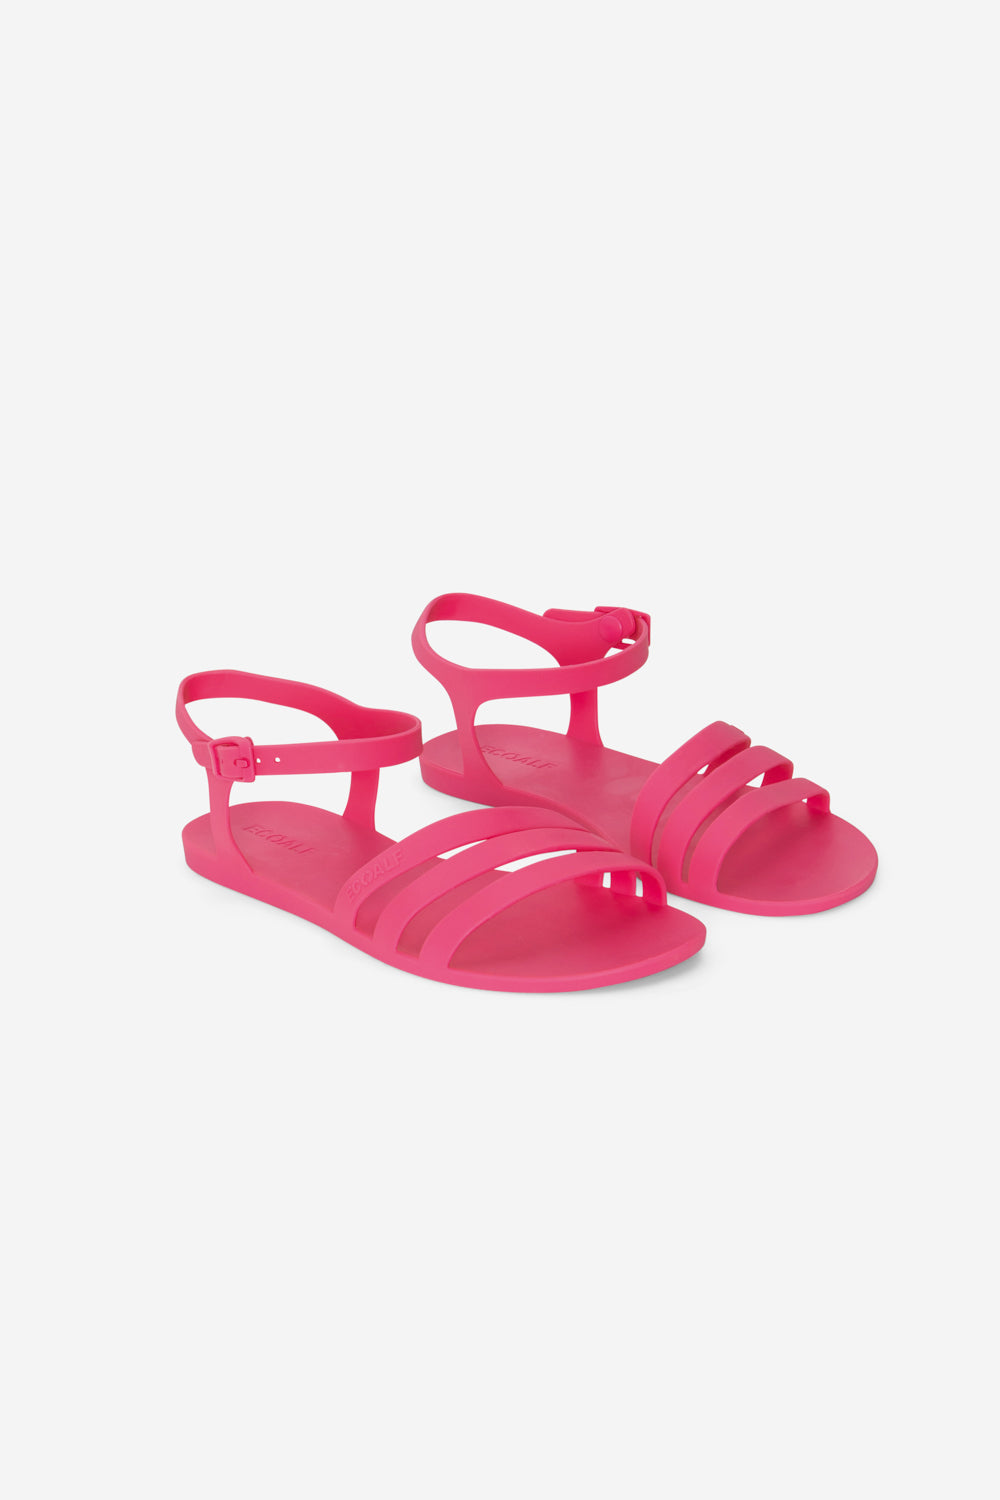 JELLY SANDALS PINK